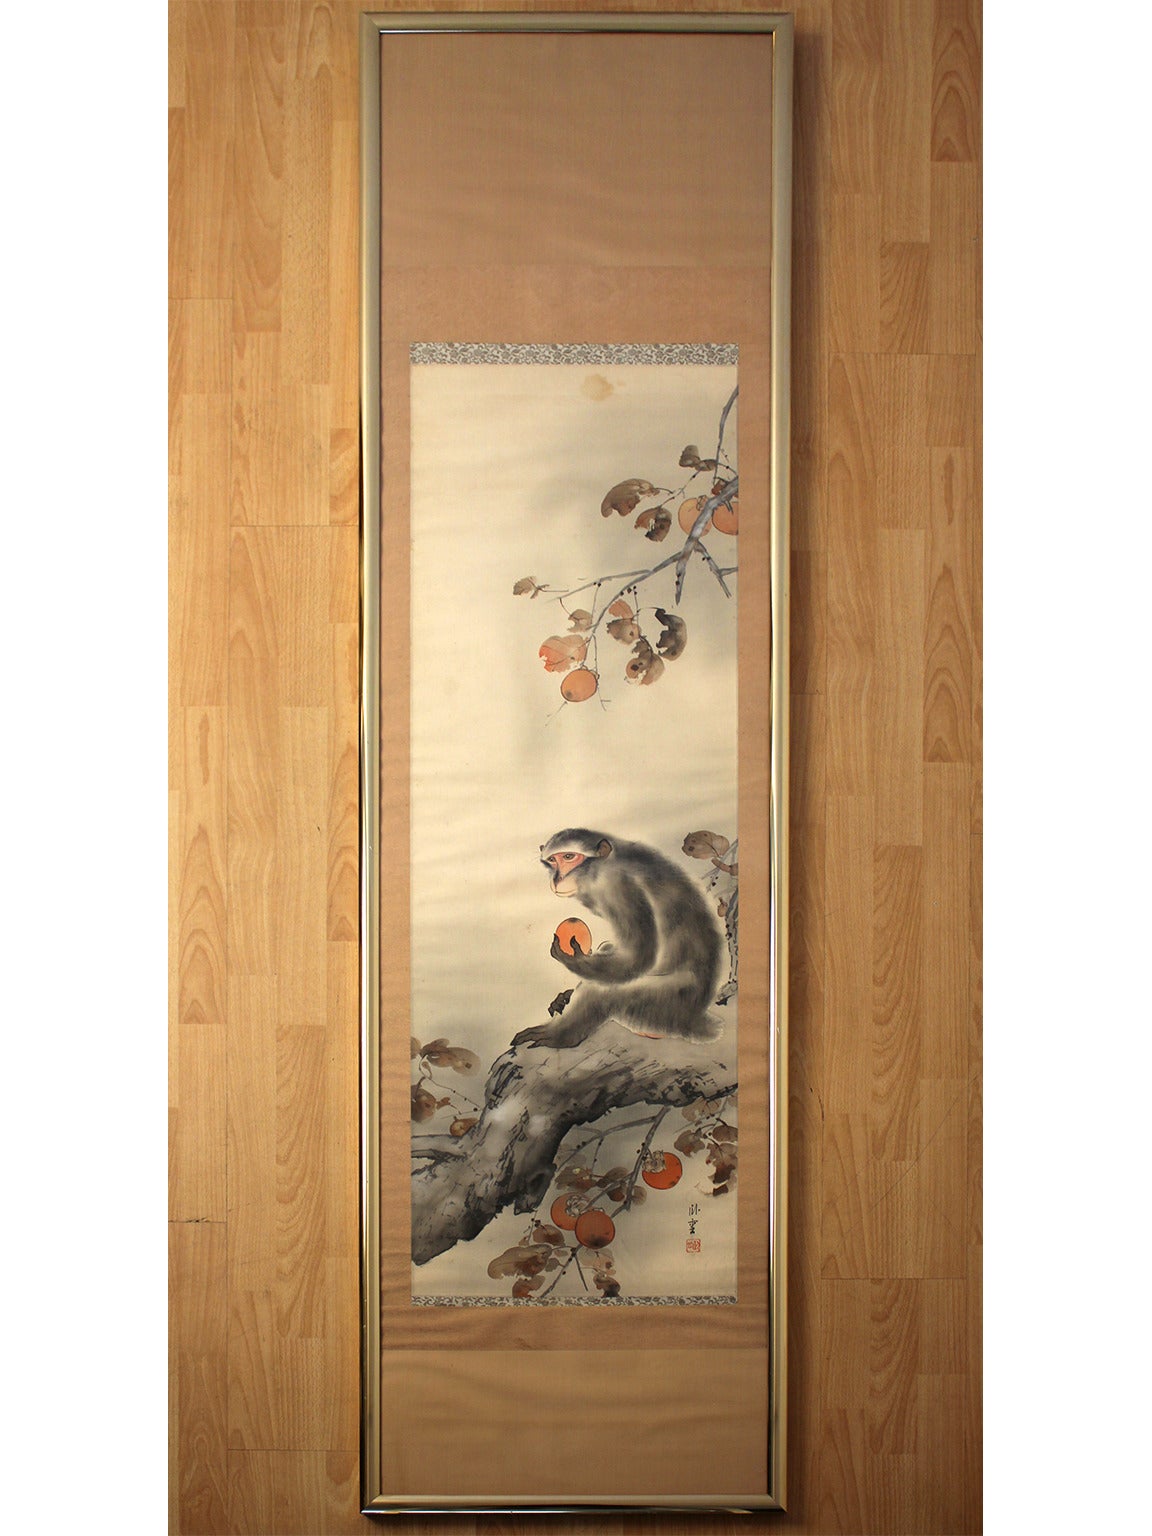 Antique Japanese Meiji period monkey with persimmon framed silk scroll painting. Signed with age related wear as pictured. Additional images on request.

Measures: 76